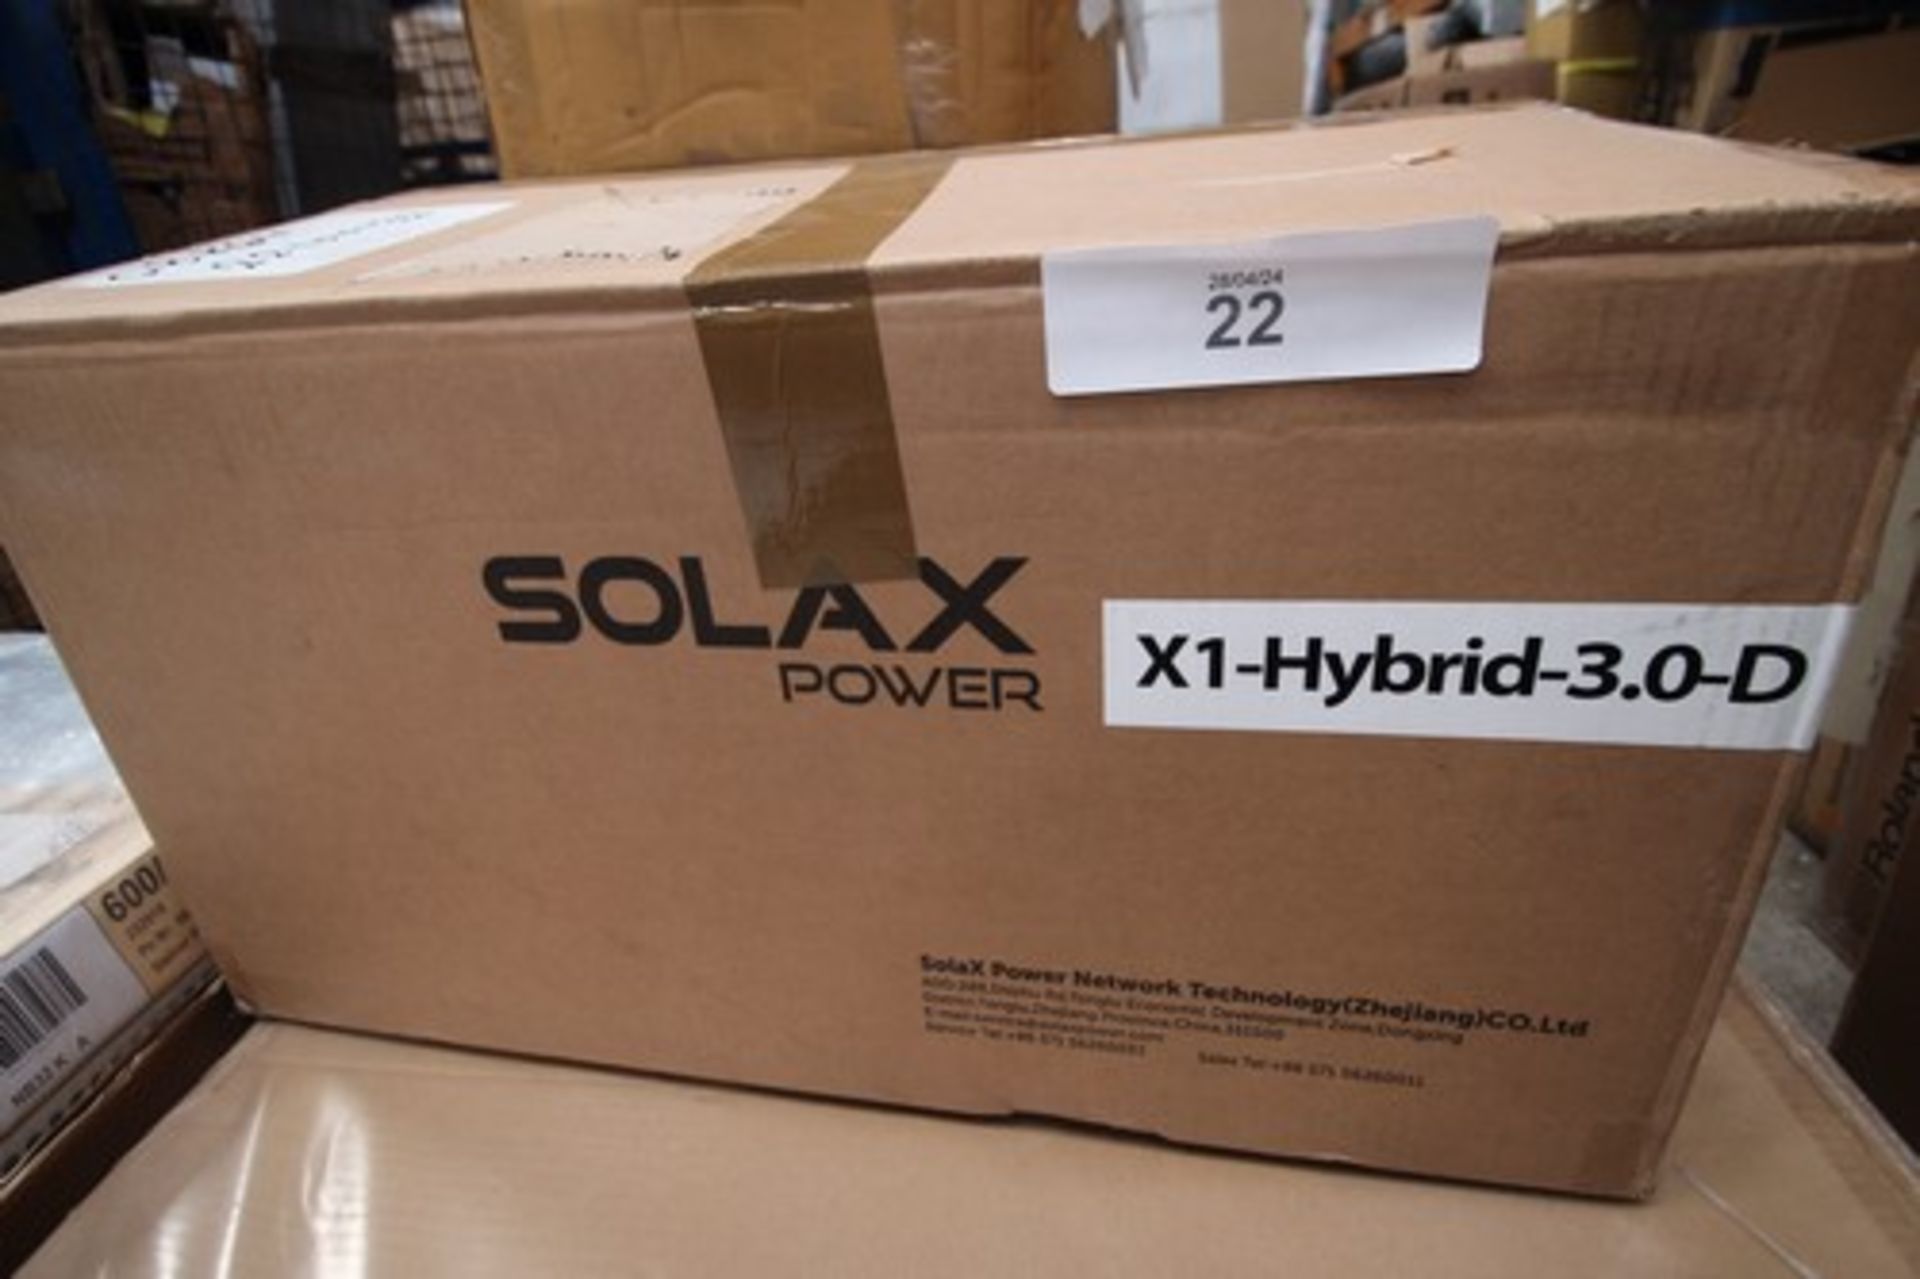 1 x Solax Power X1 hybrid 3.0D energy store photovoltaic inverter including Wi-Fi - New in box (D6) - Image 2 of 2